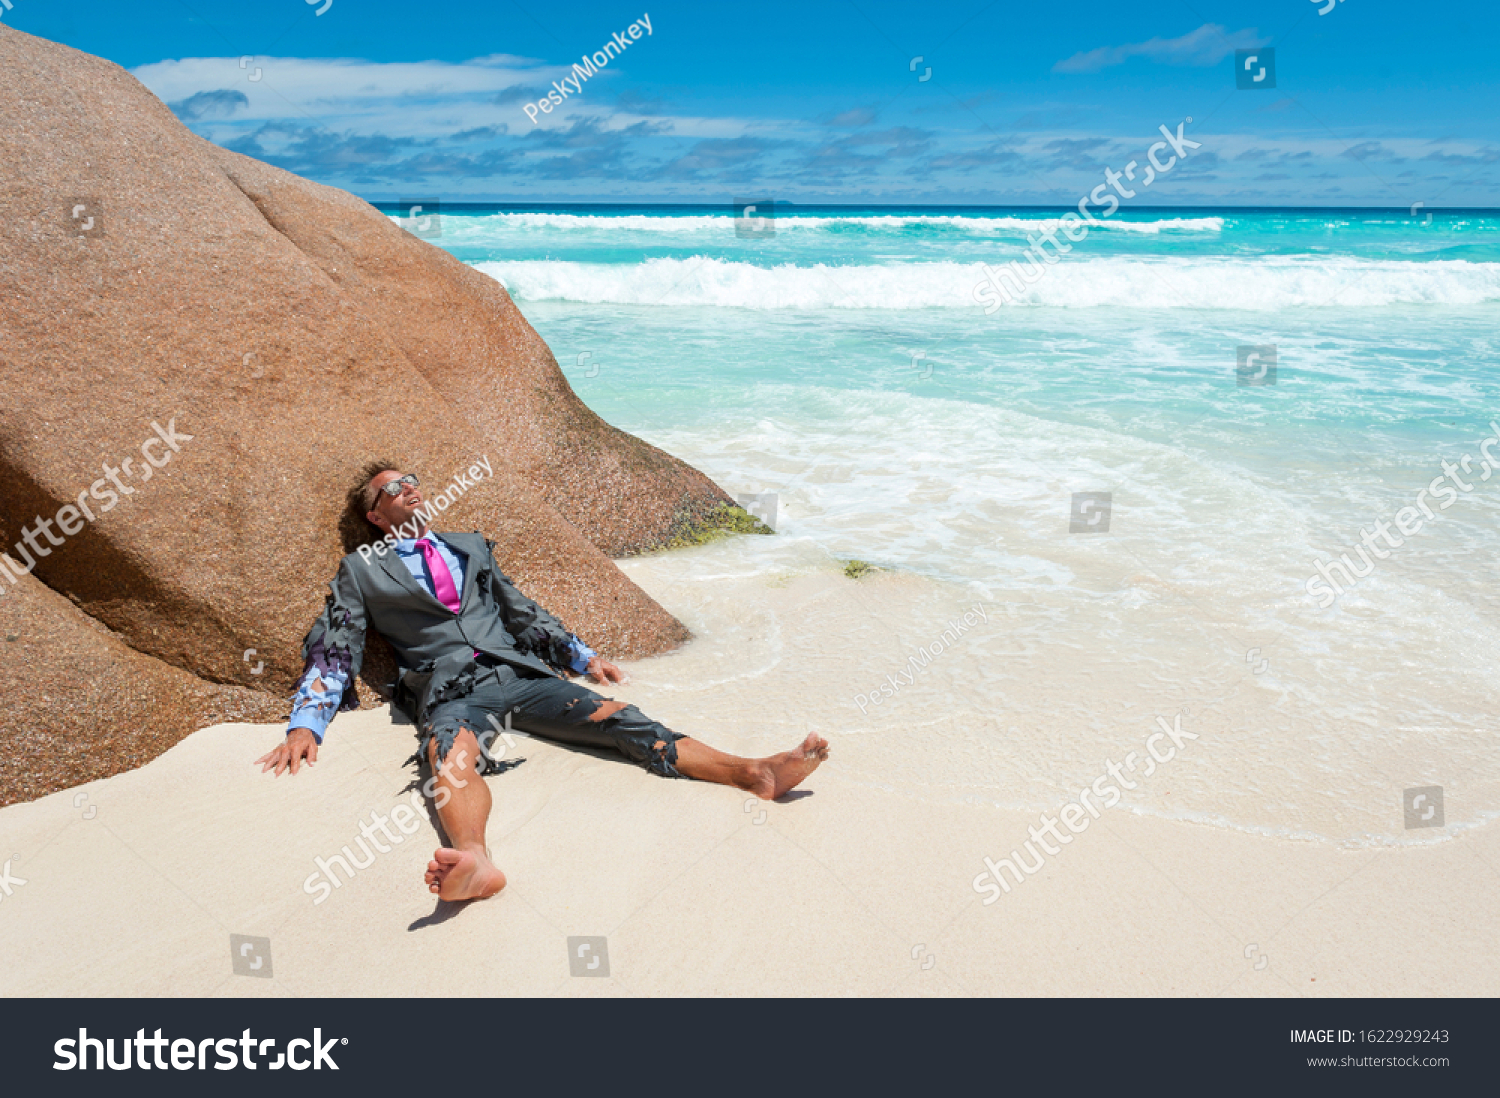 Survivor castaway businessman washed up on a tropical beach in a ragged torn suit #1622929243